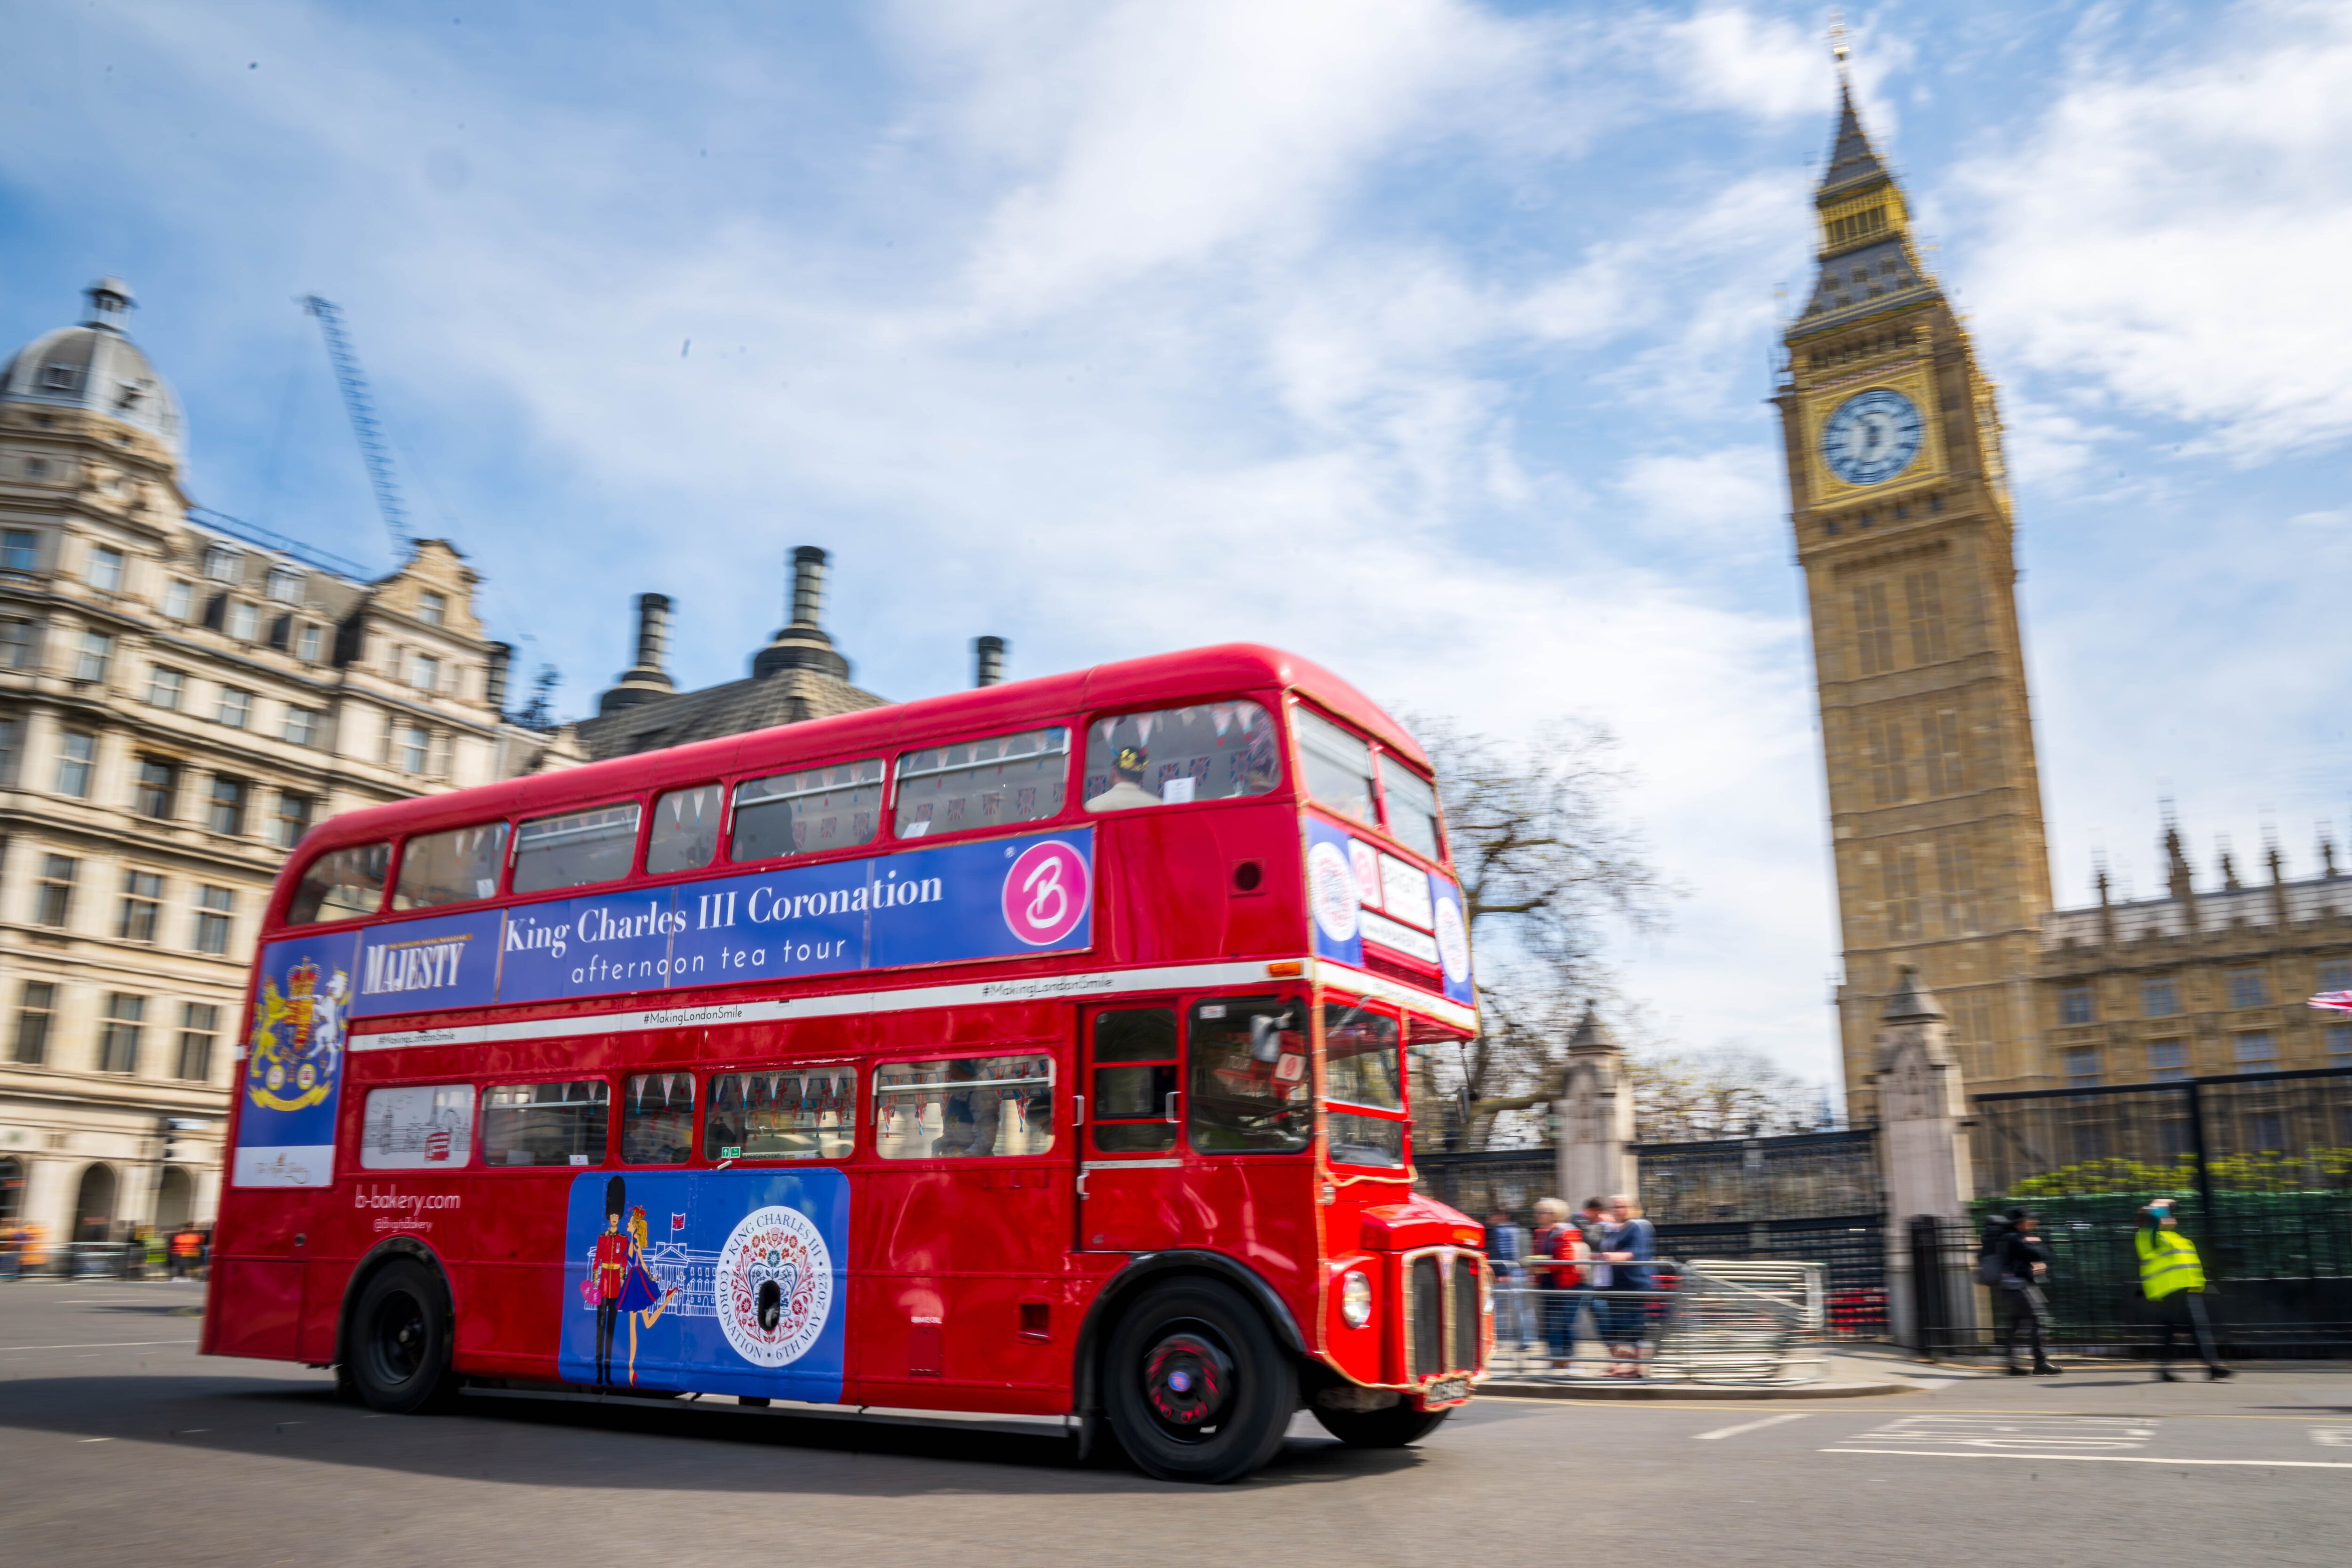 04/05/2023 04 May 2023, United Kingdom, London: "King Charles Coronation" is written on a double-decker bus driving past Big Ben, ahead of the coronation of King Charles III and the the Queen Consort on May 6. Photo: Sina Schuldt/dpa
POLITICA INTERNACIONAL
Sina Schuldt/Dpa
